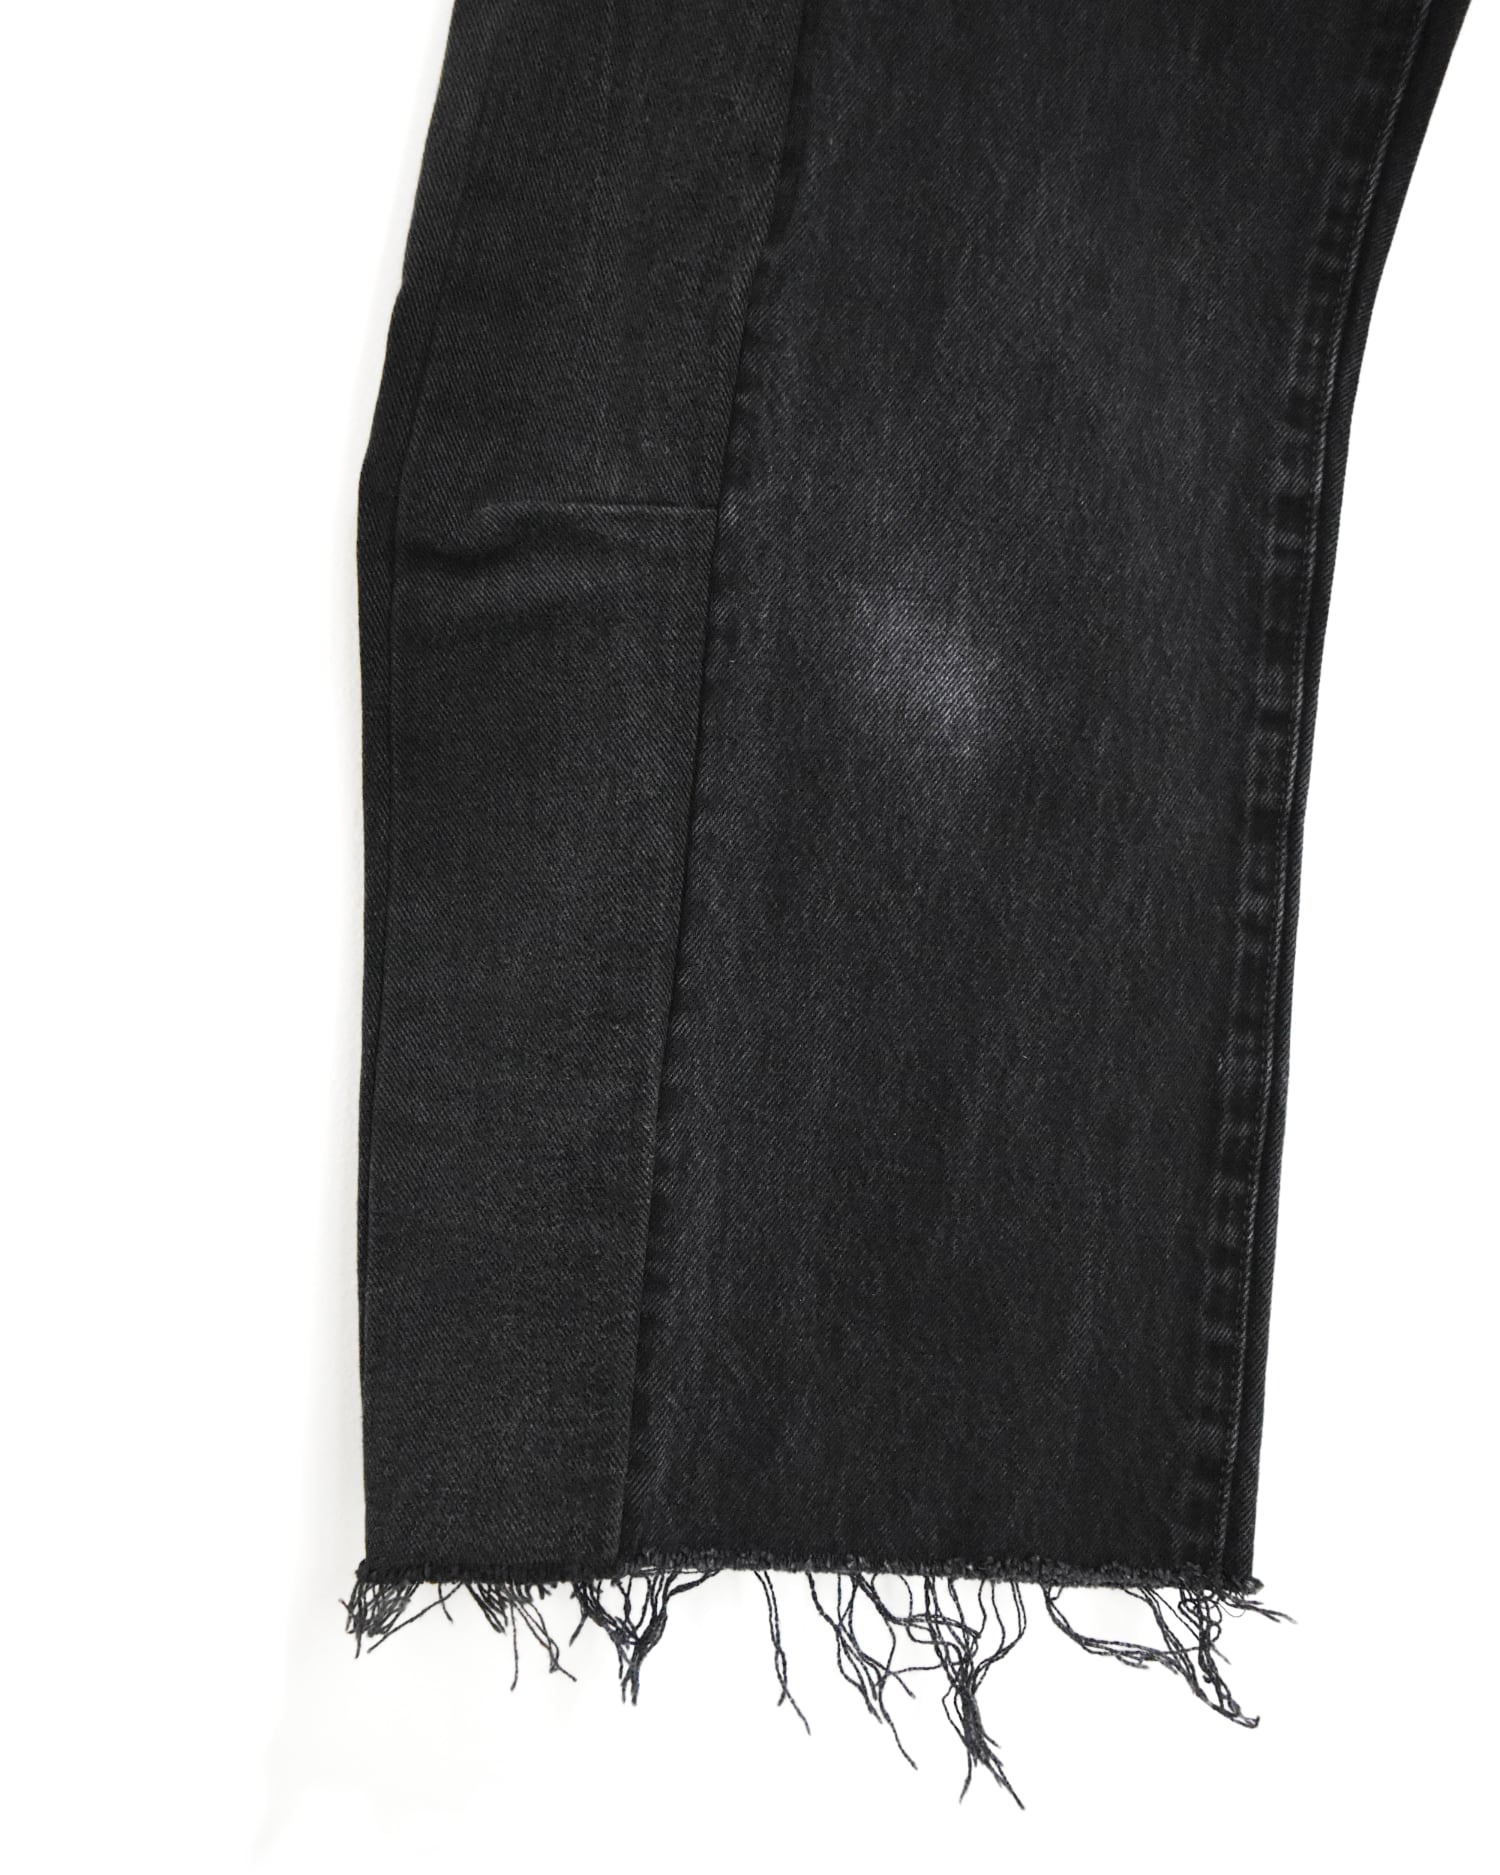 Lasso Upcycled Black Relaxed Fit Jeans